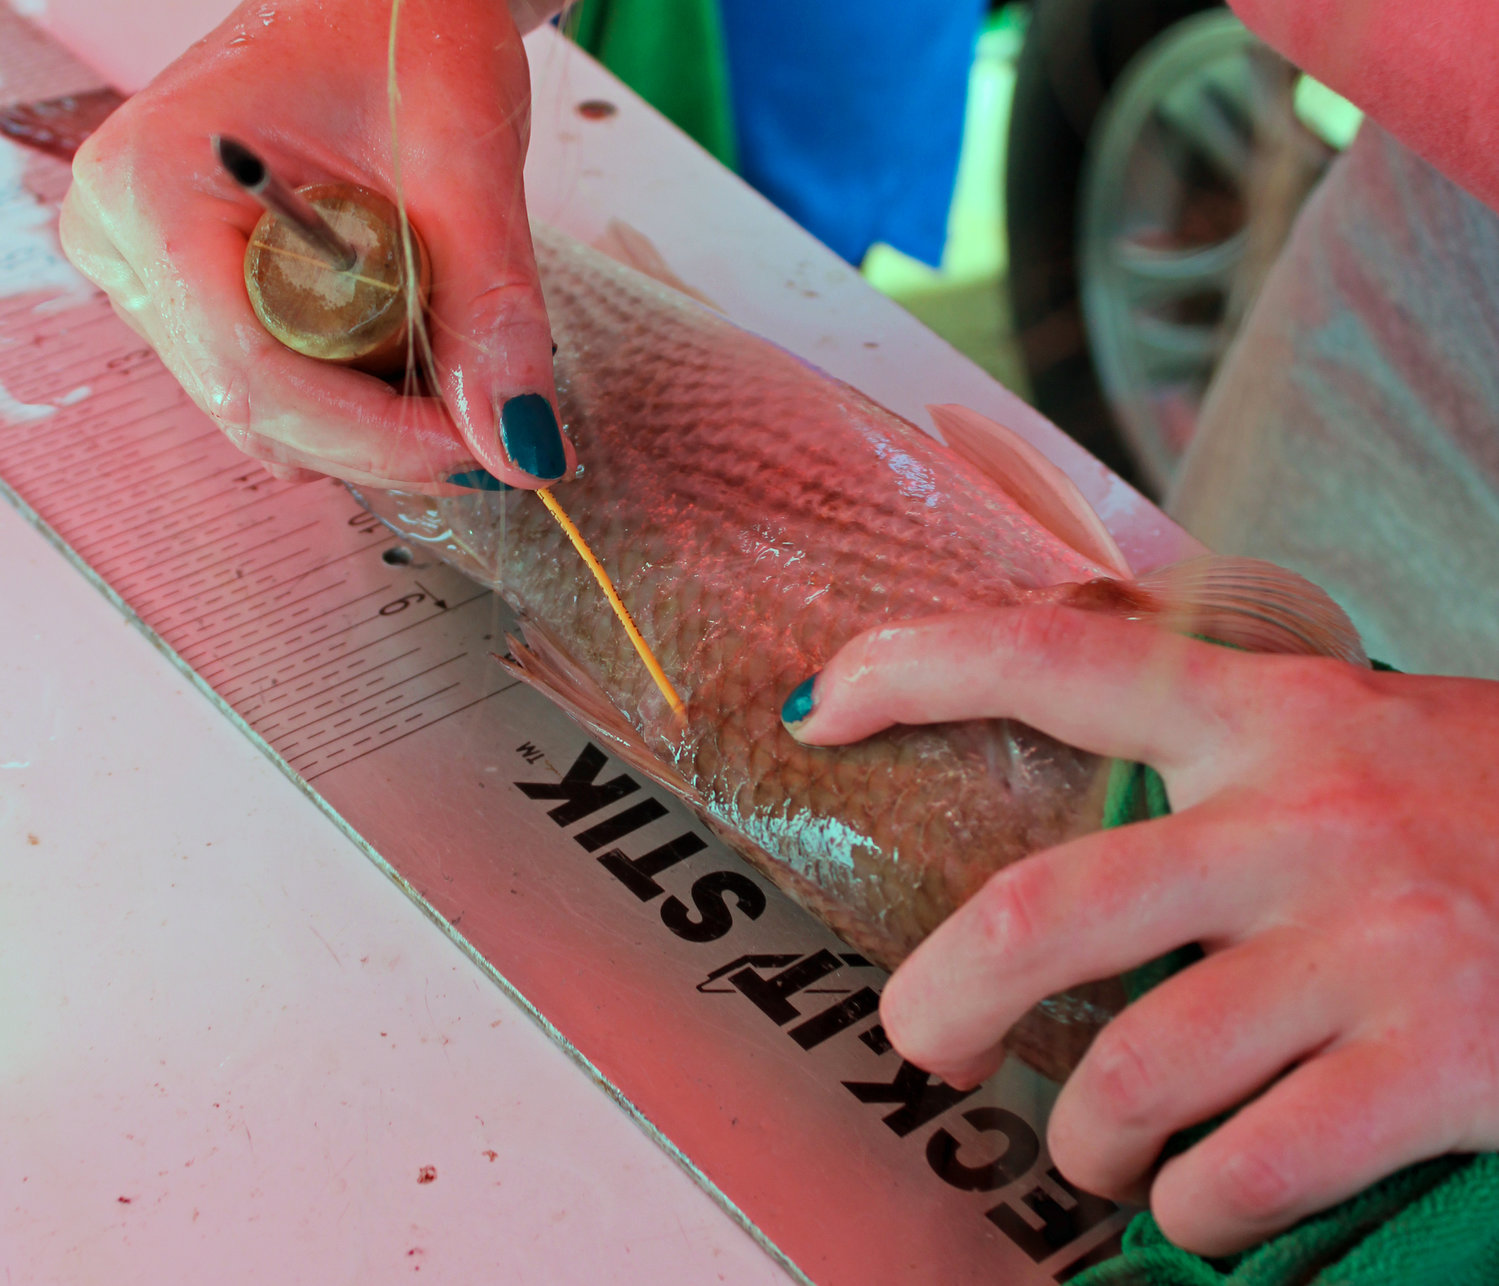 The TAG Alabama seminar shows anglers how to properly tag a fish near the dorsal fin.